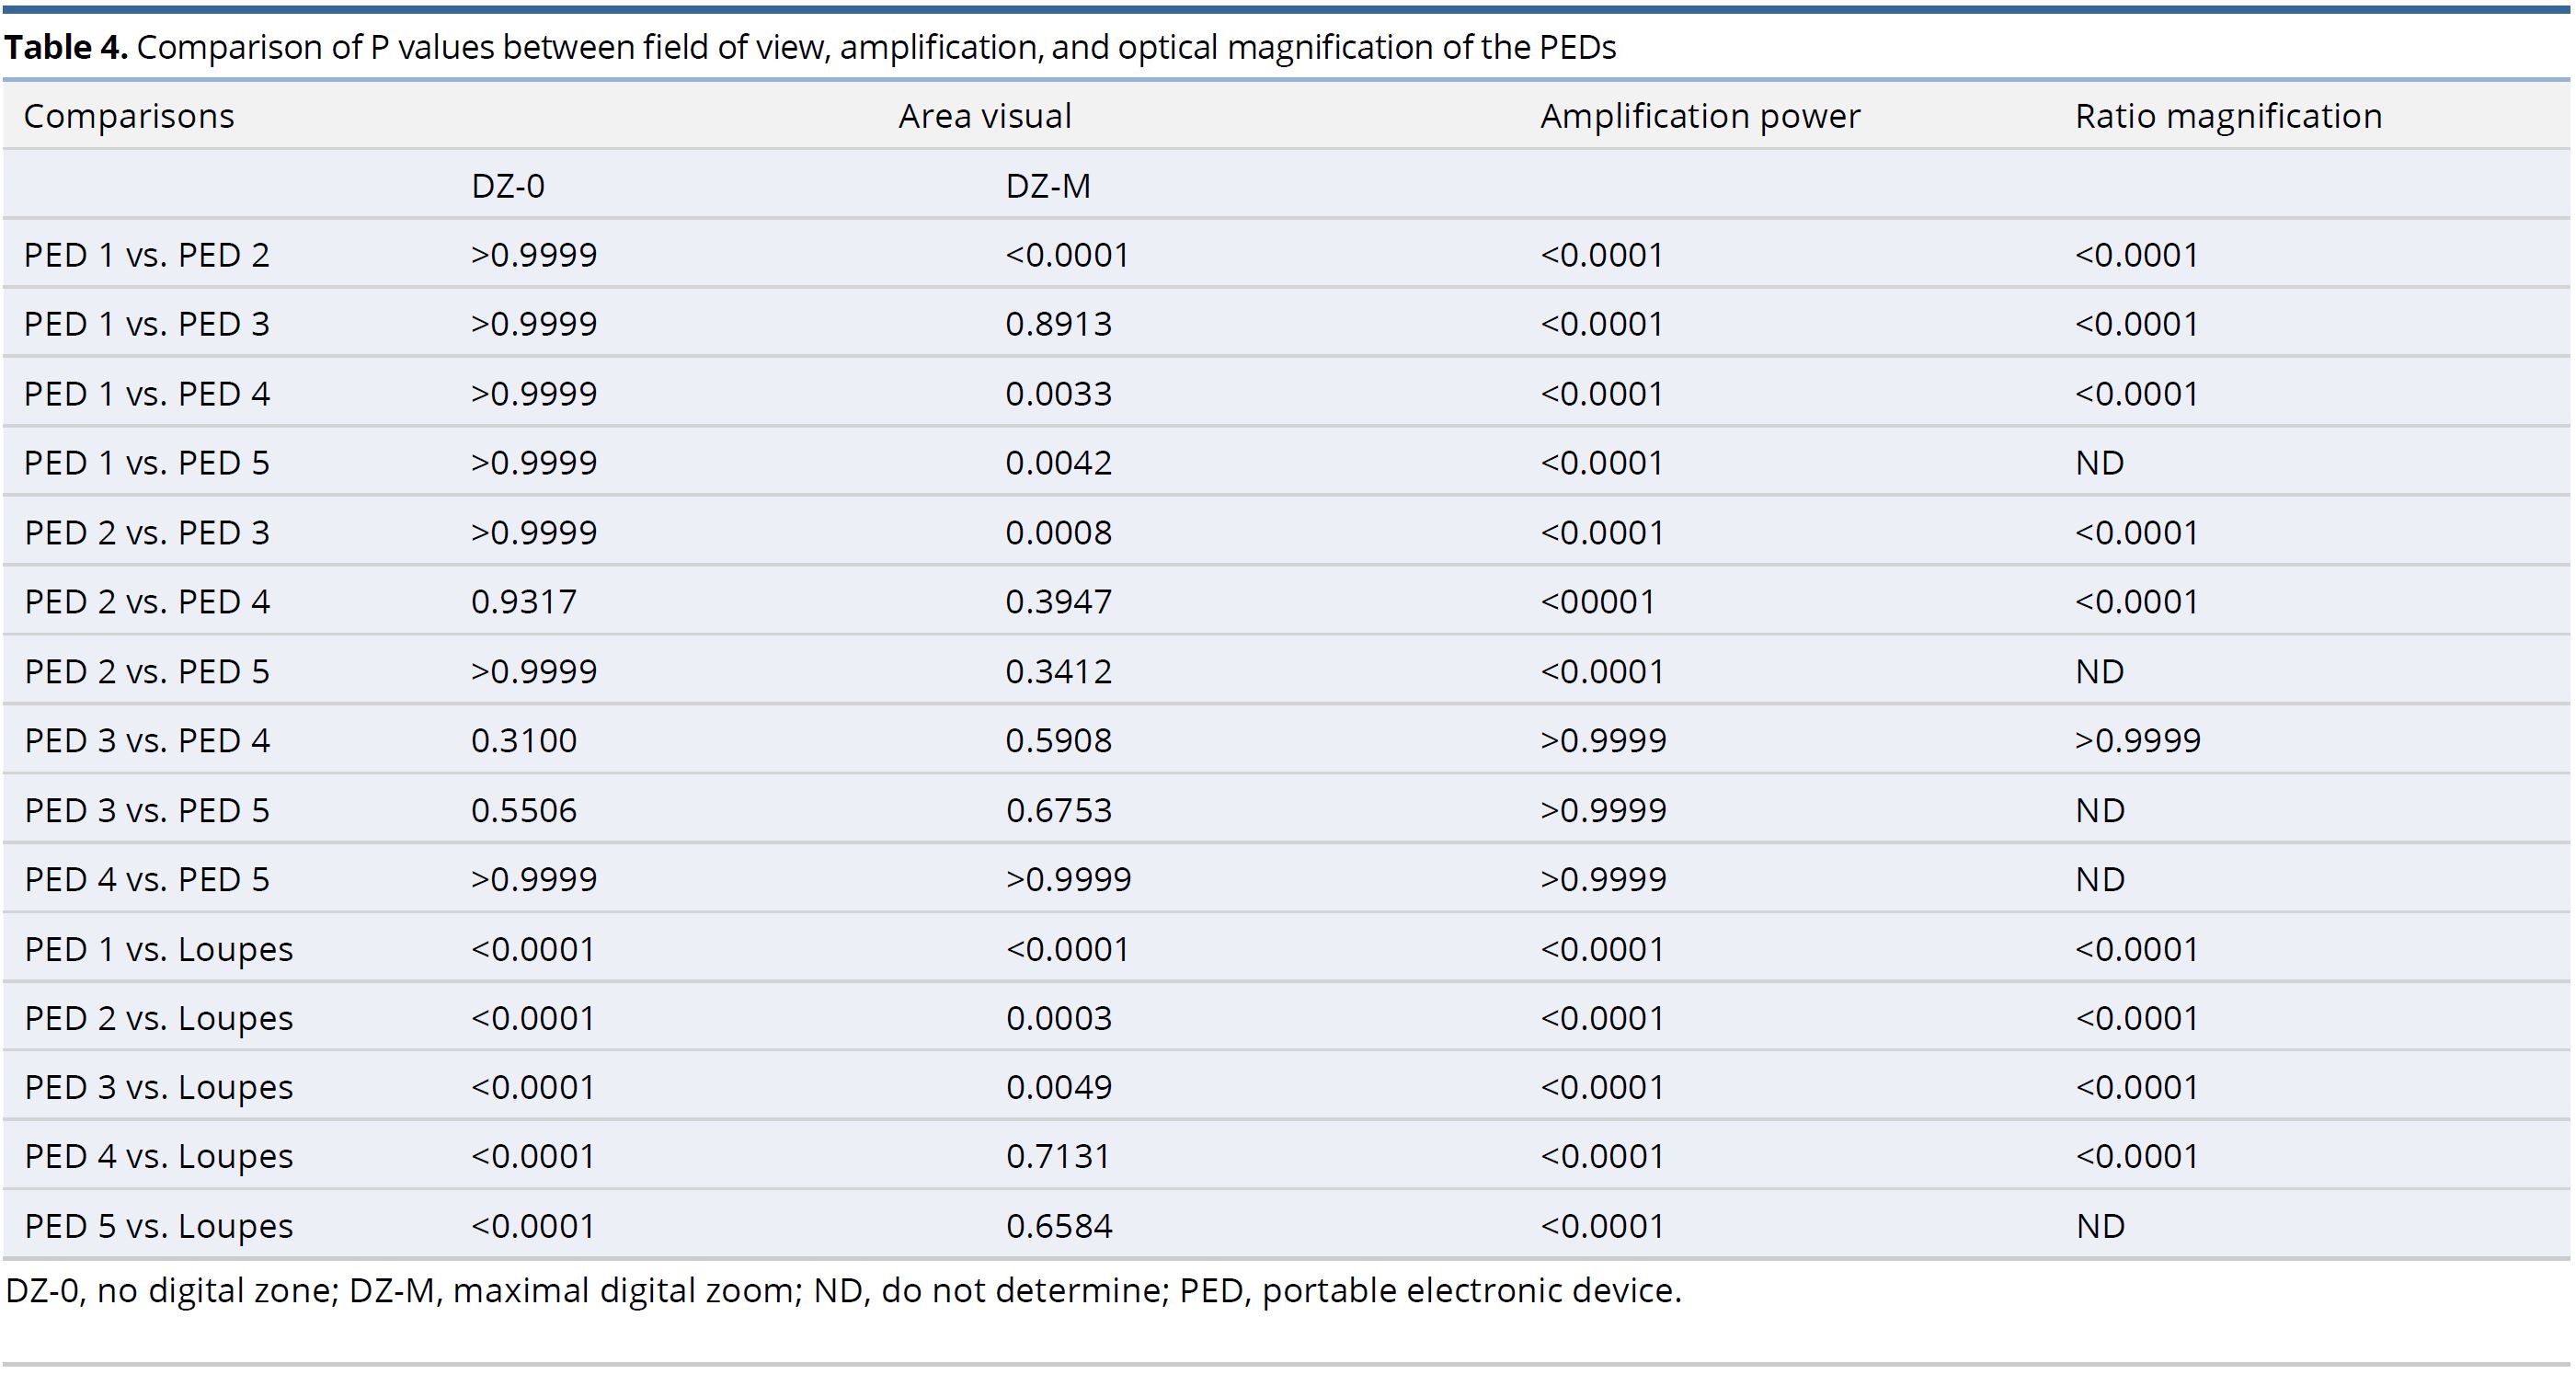 Table 4.JPGComparison of P values between field of view, amplification, and optical magnification of the PEDs.